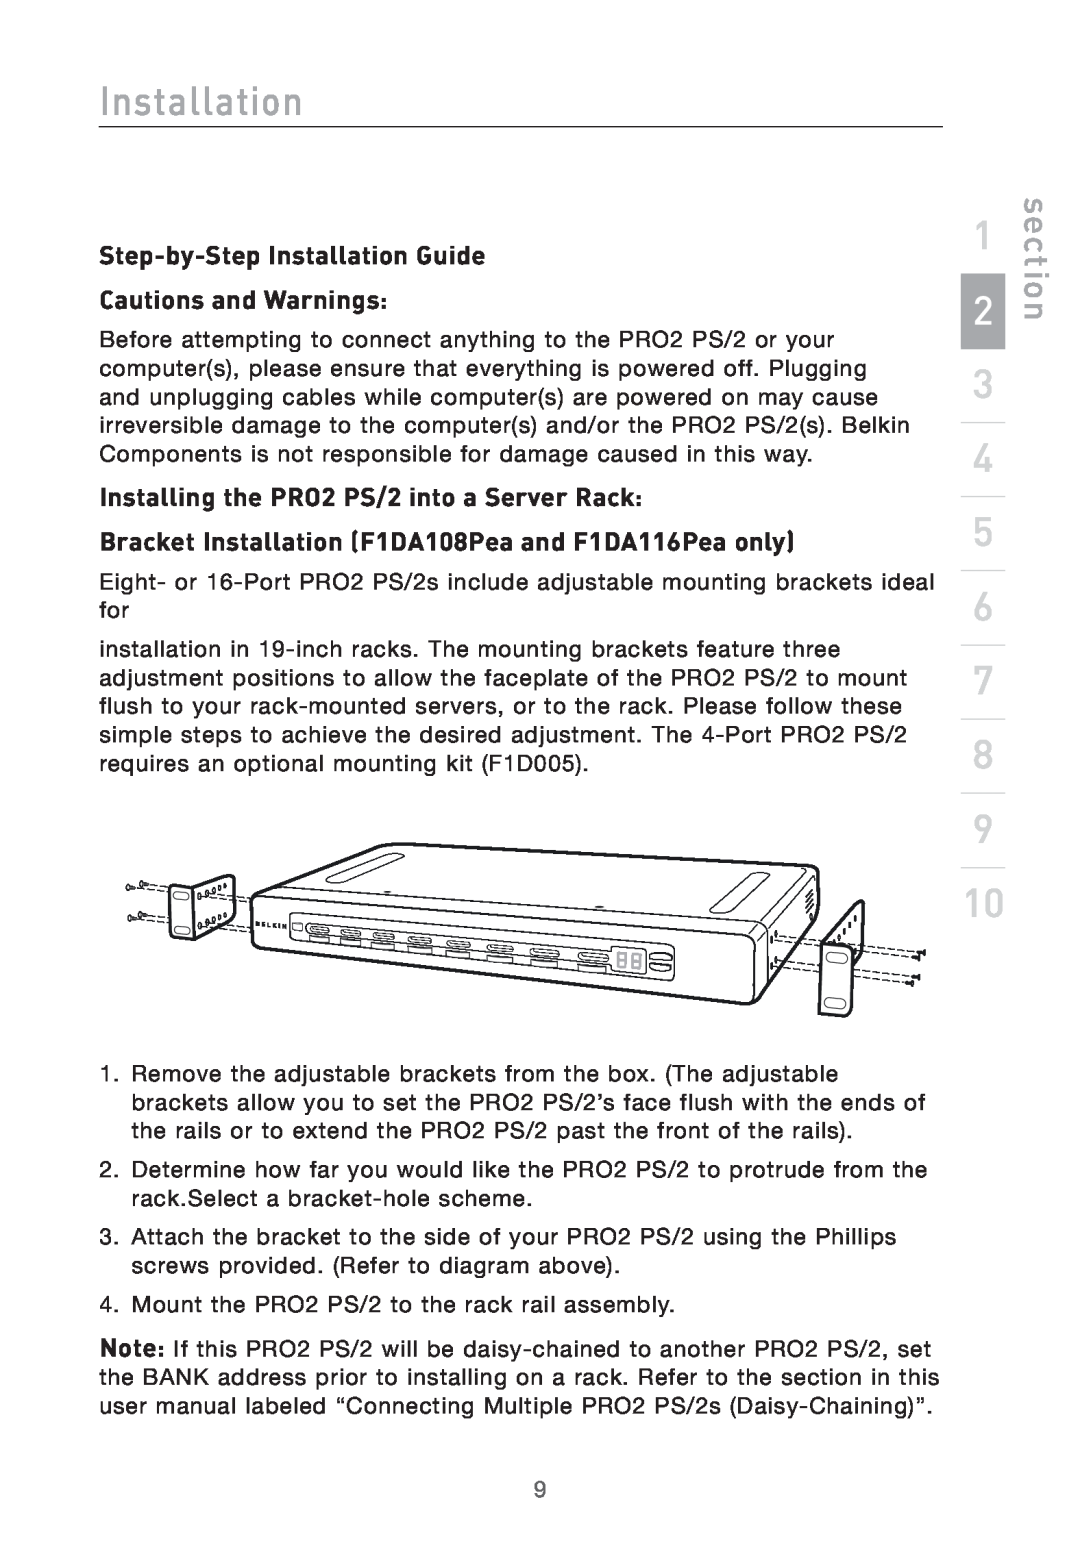 Belkin F1DA104PEA Step-by-Step Installation Guide Cautions and Warnings, Installing the PRO2 PS/2 into a Server Rack 